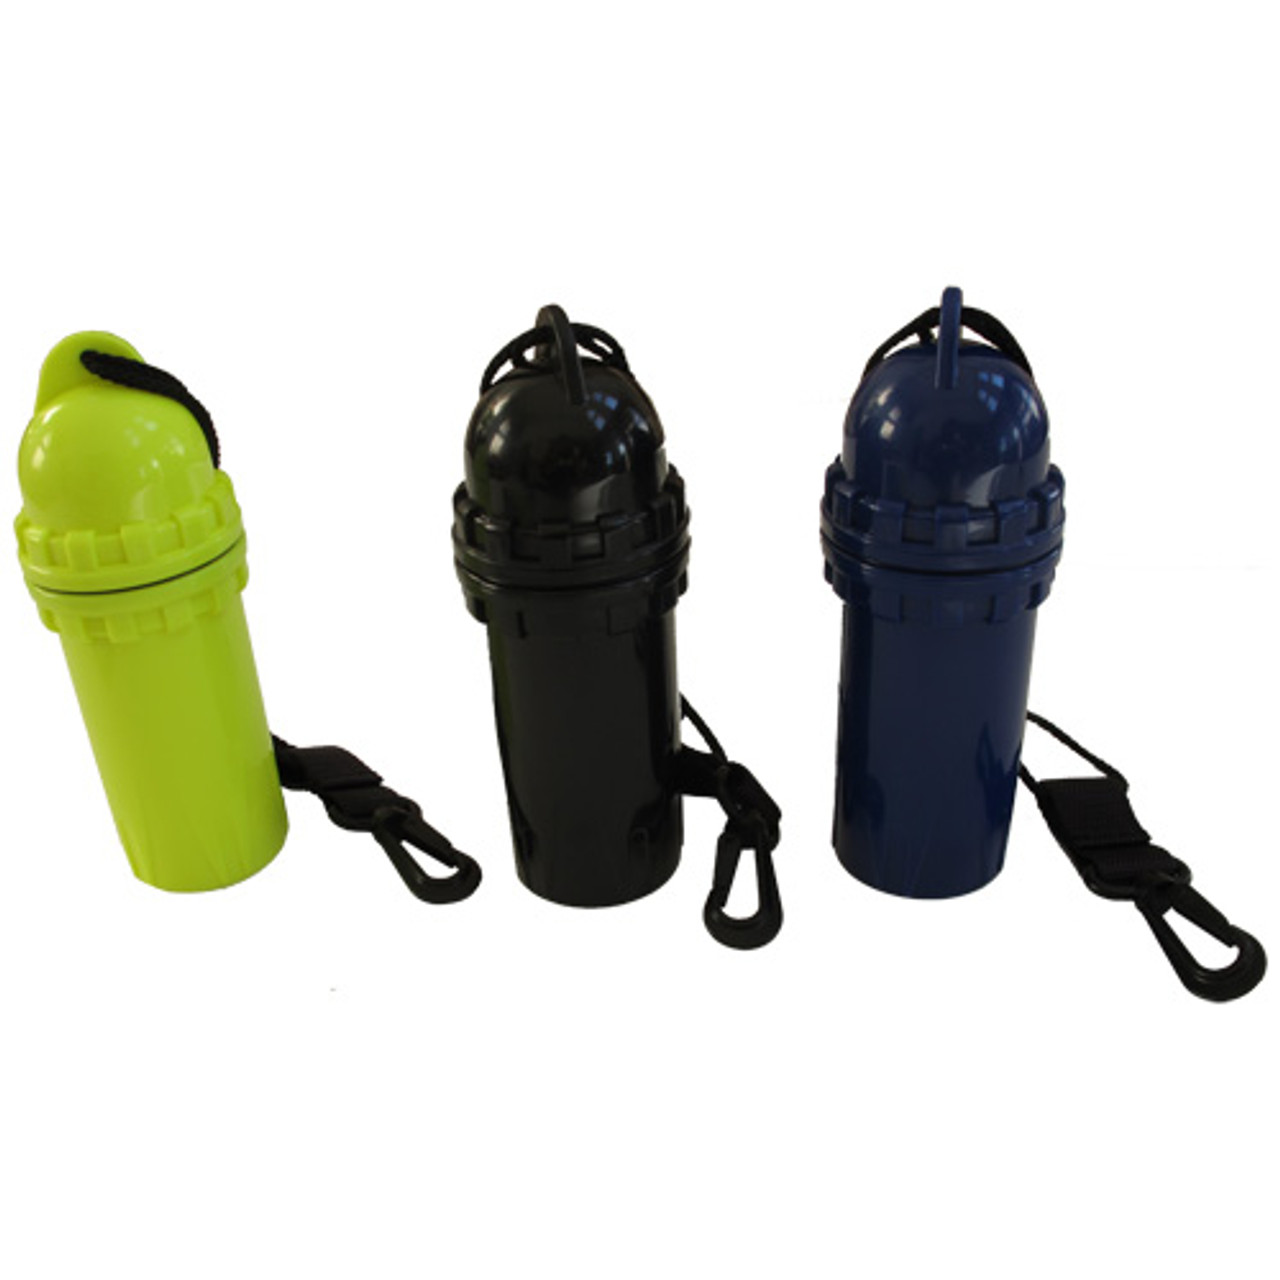 Scuba Diving Snorkeling Waterproof Cylindrical Dry Box with Clip